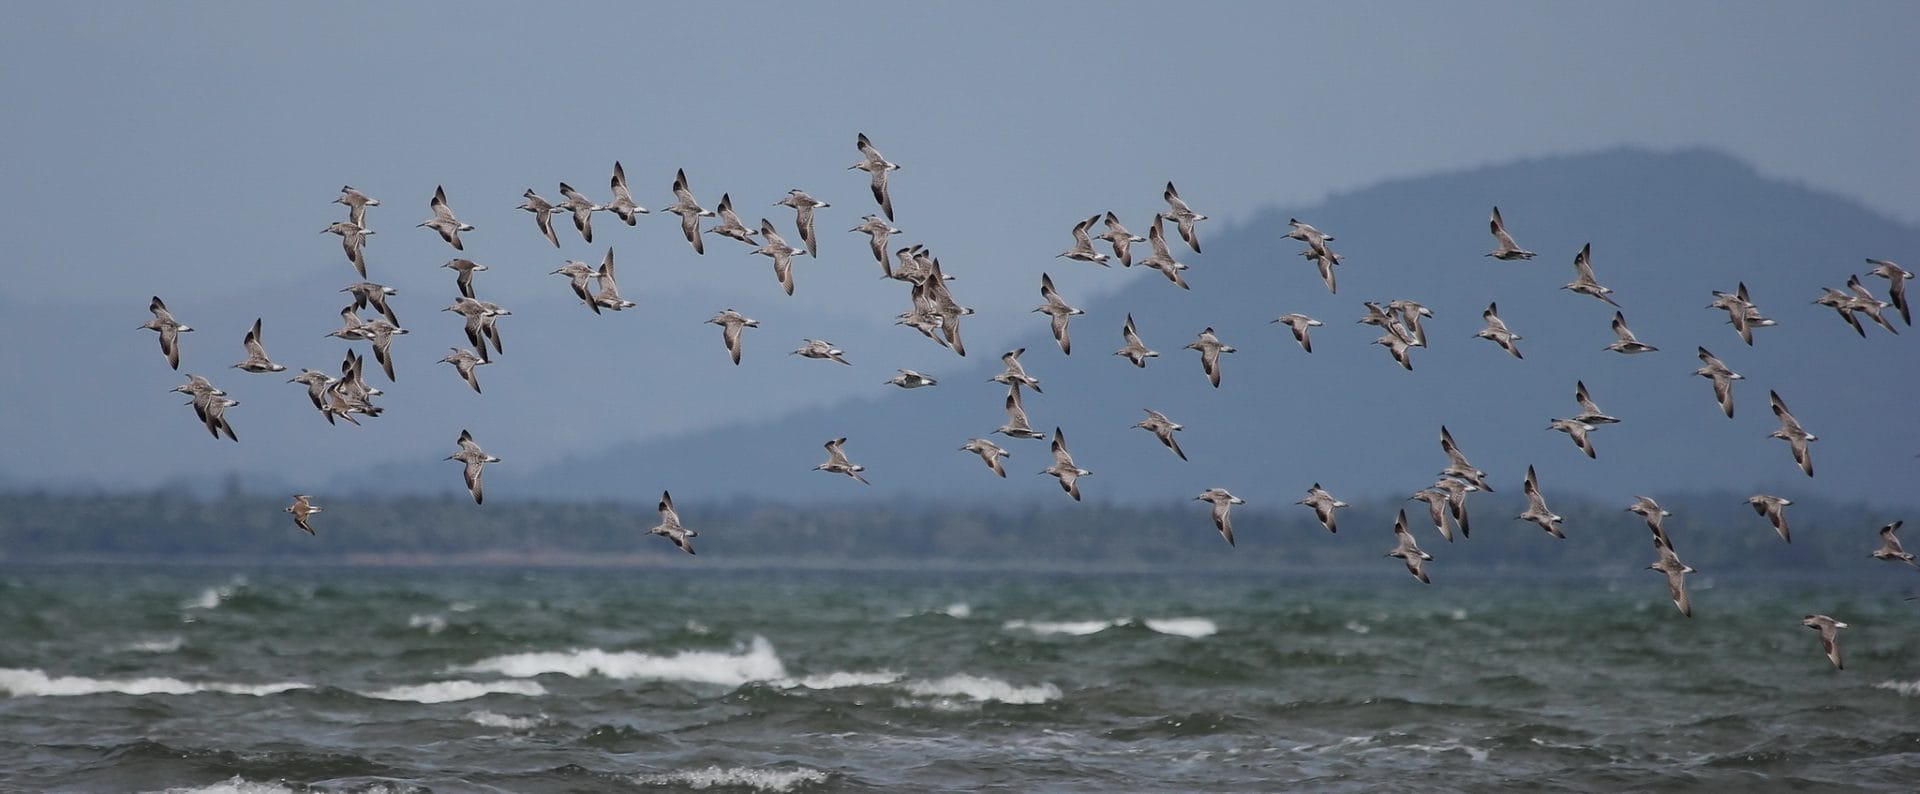 A great flight of Great Knot. Photo by Christian Perez.